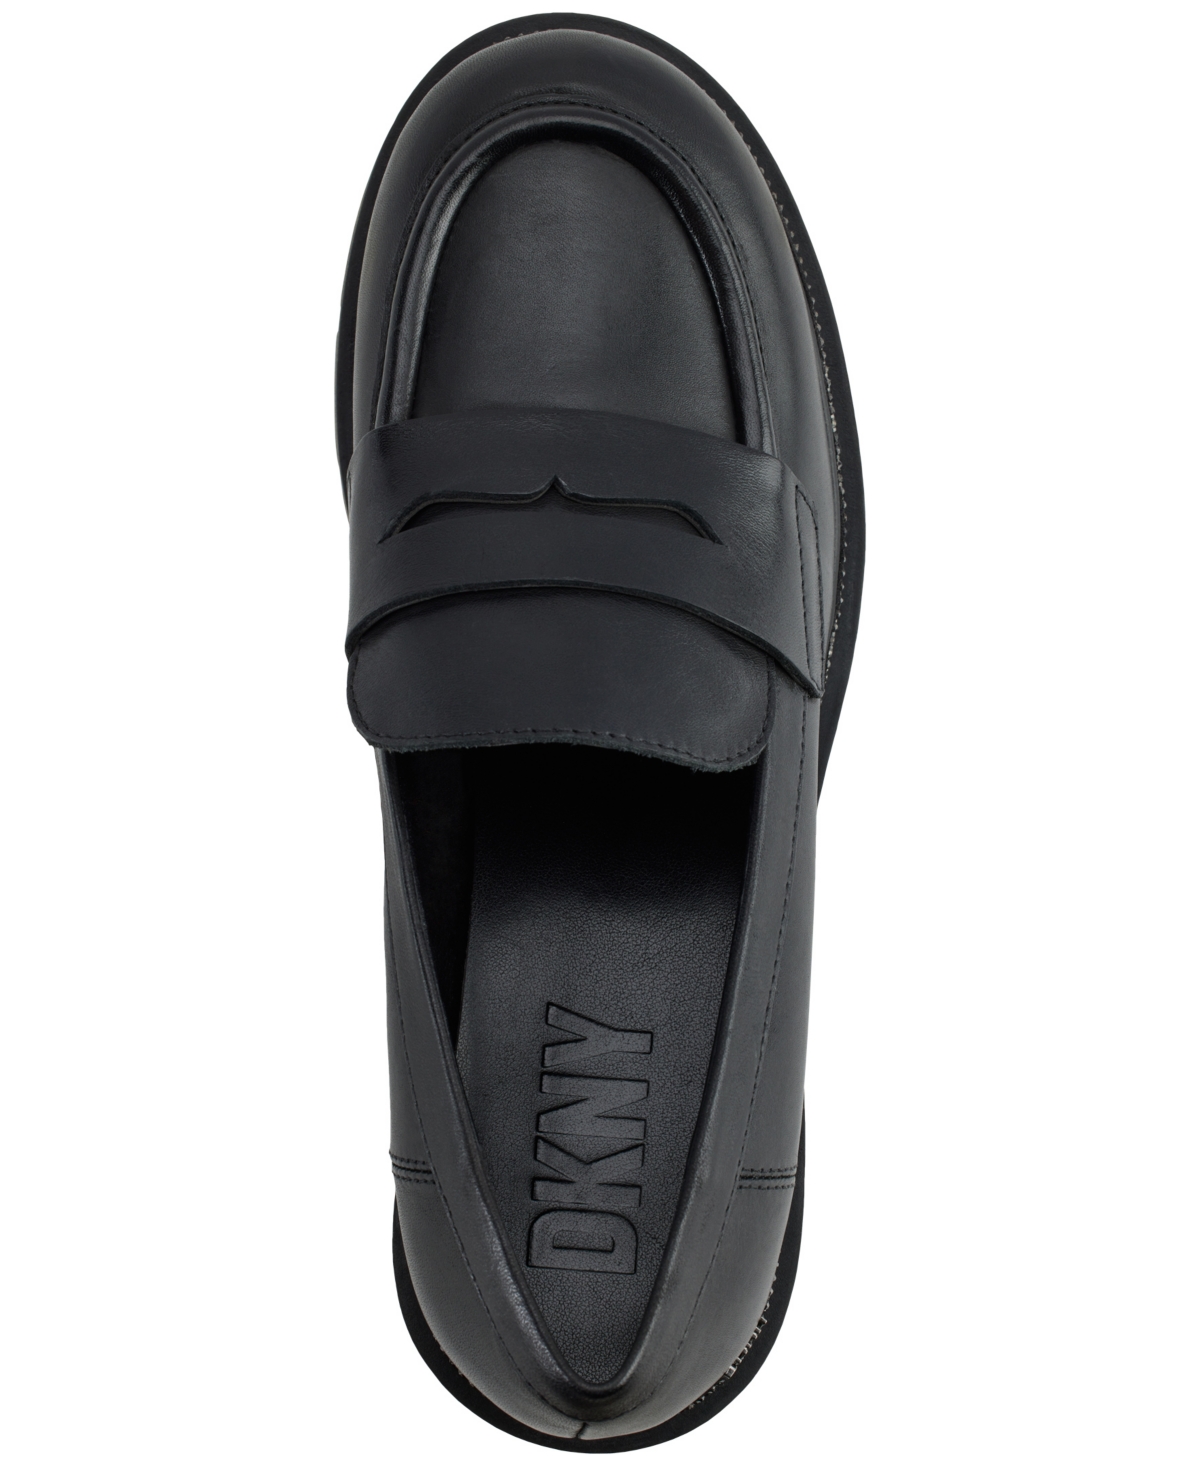 Shop Dkny Women's Rudy Slip-on Penny Loafer Flats In Pebble